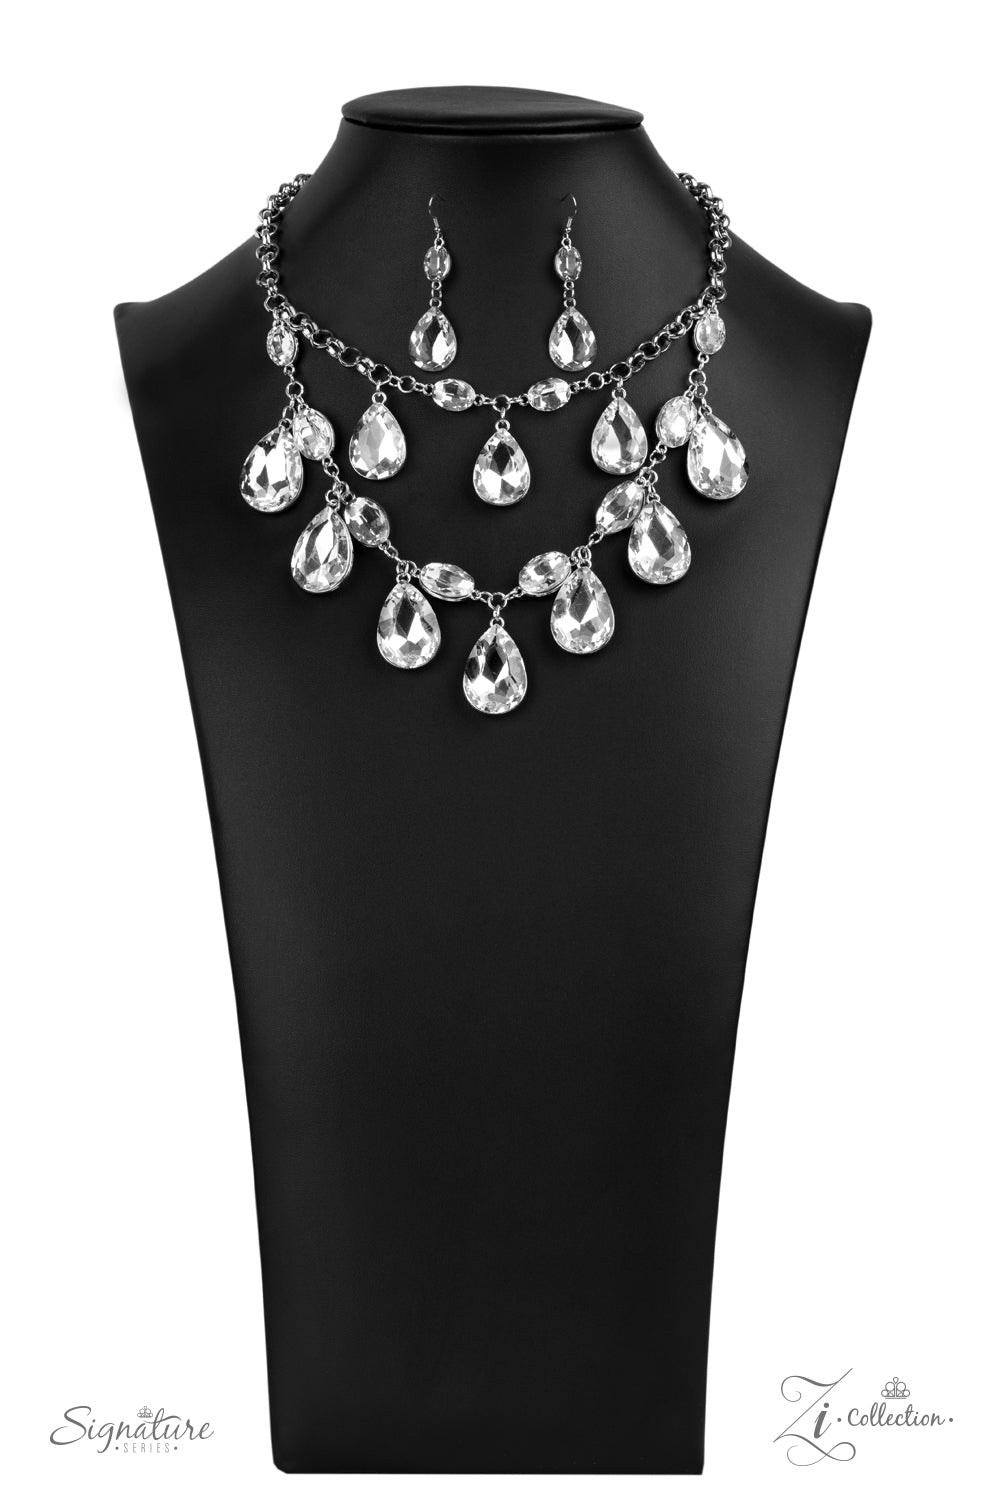 The Sarah - Zi Collection - Paparazzi necklace